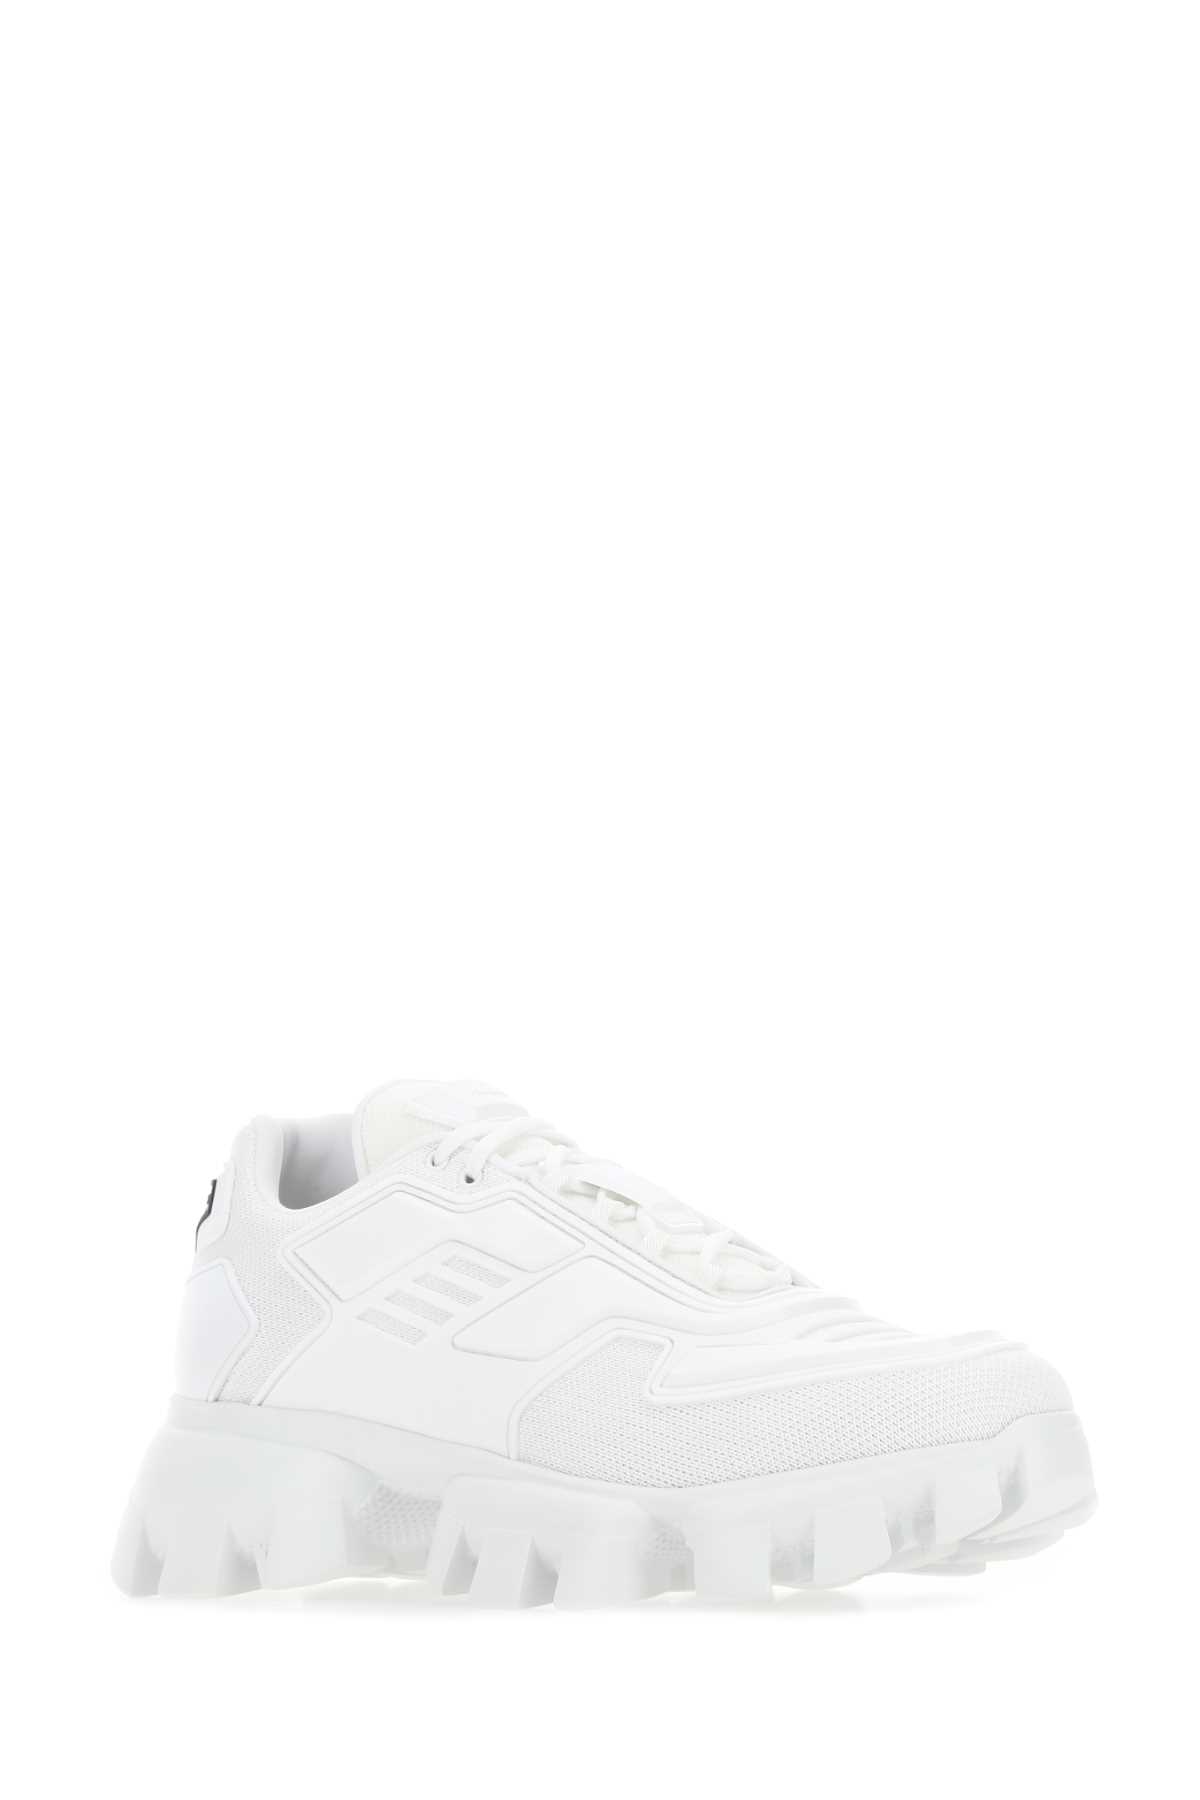 Prada White Rubber And Mesh Cloudbust Thunder Trainers In F0009